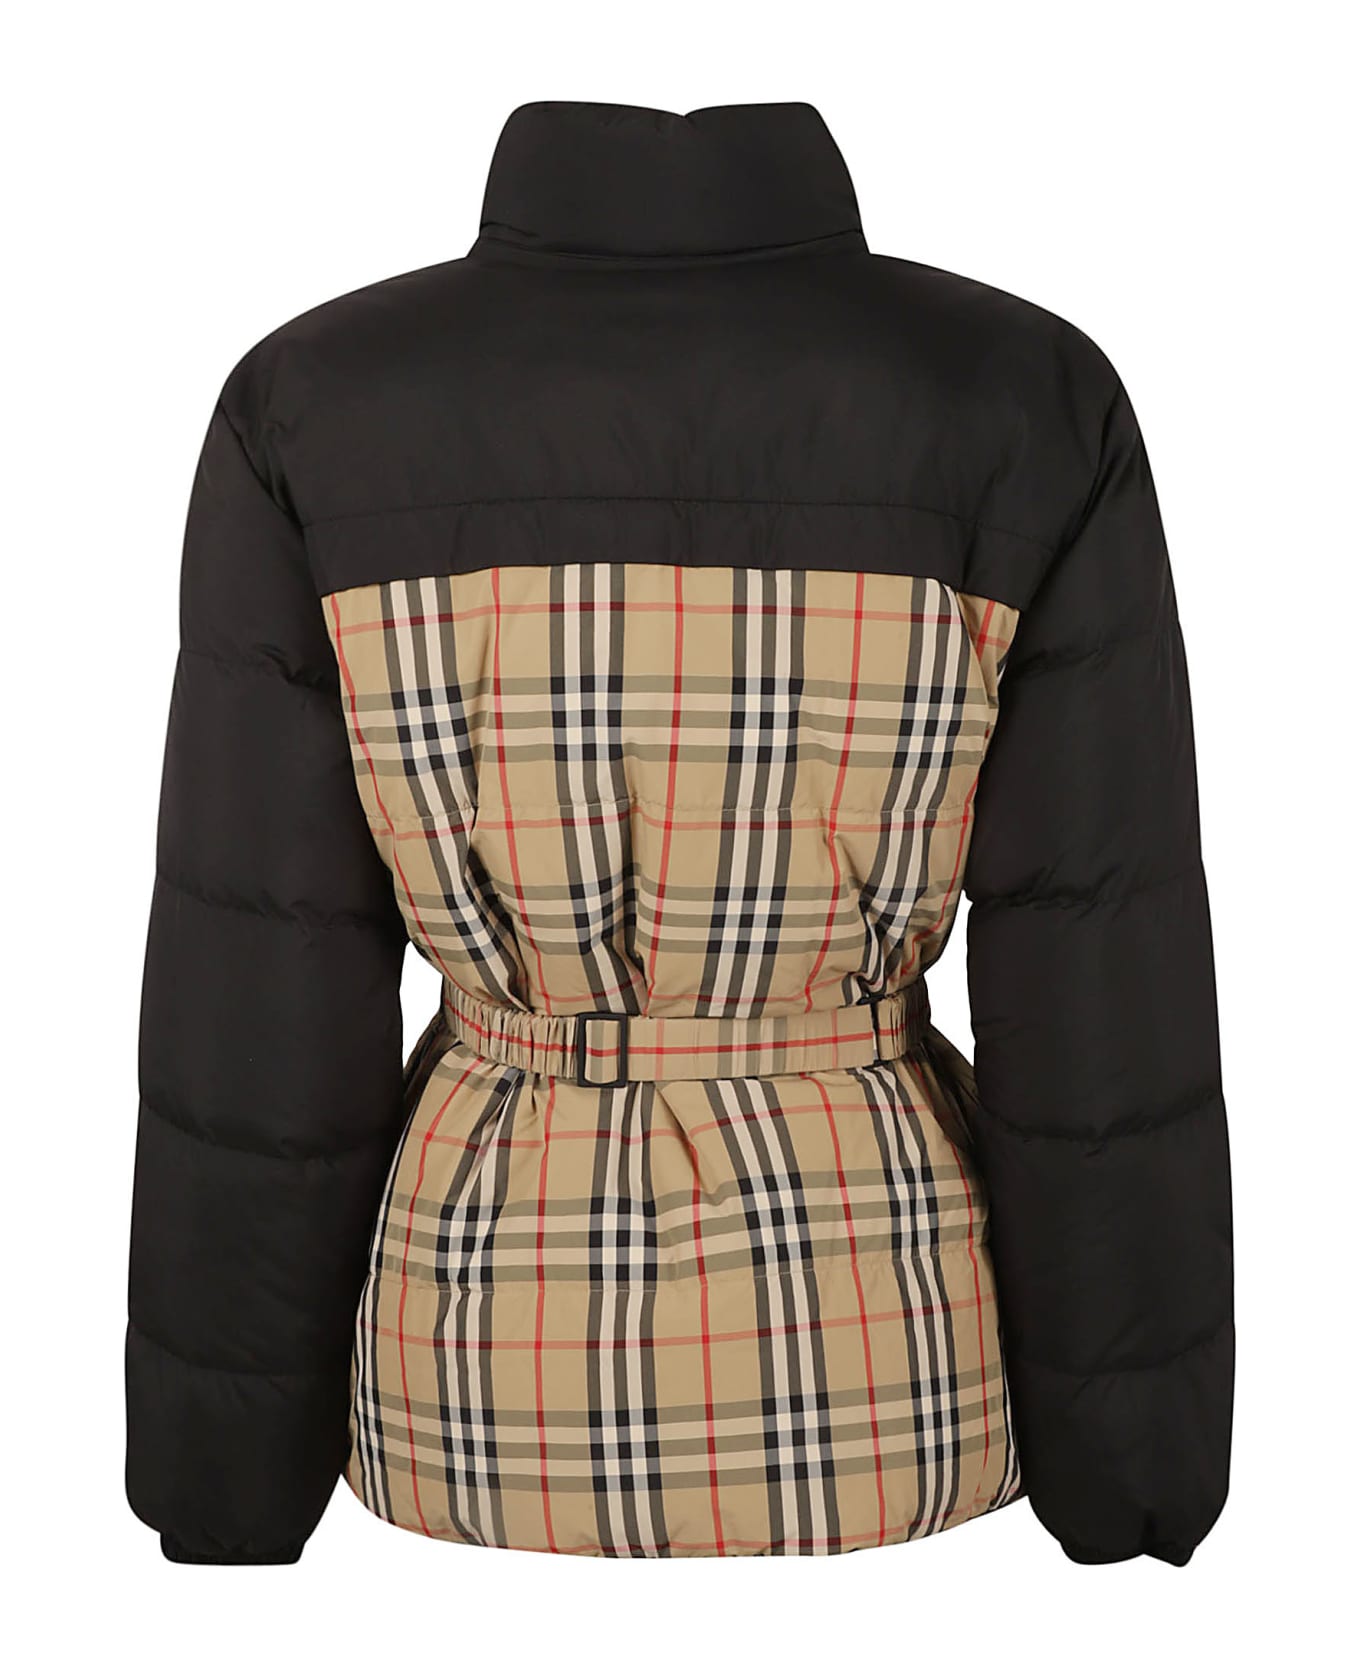 Burberry Fitted Waist Belted Padded Jacket - Archive Beige Ip Chk